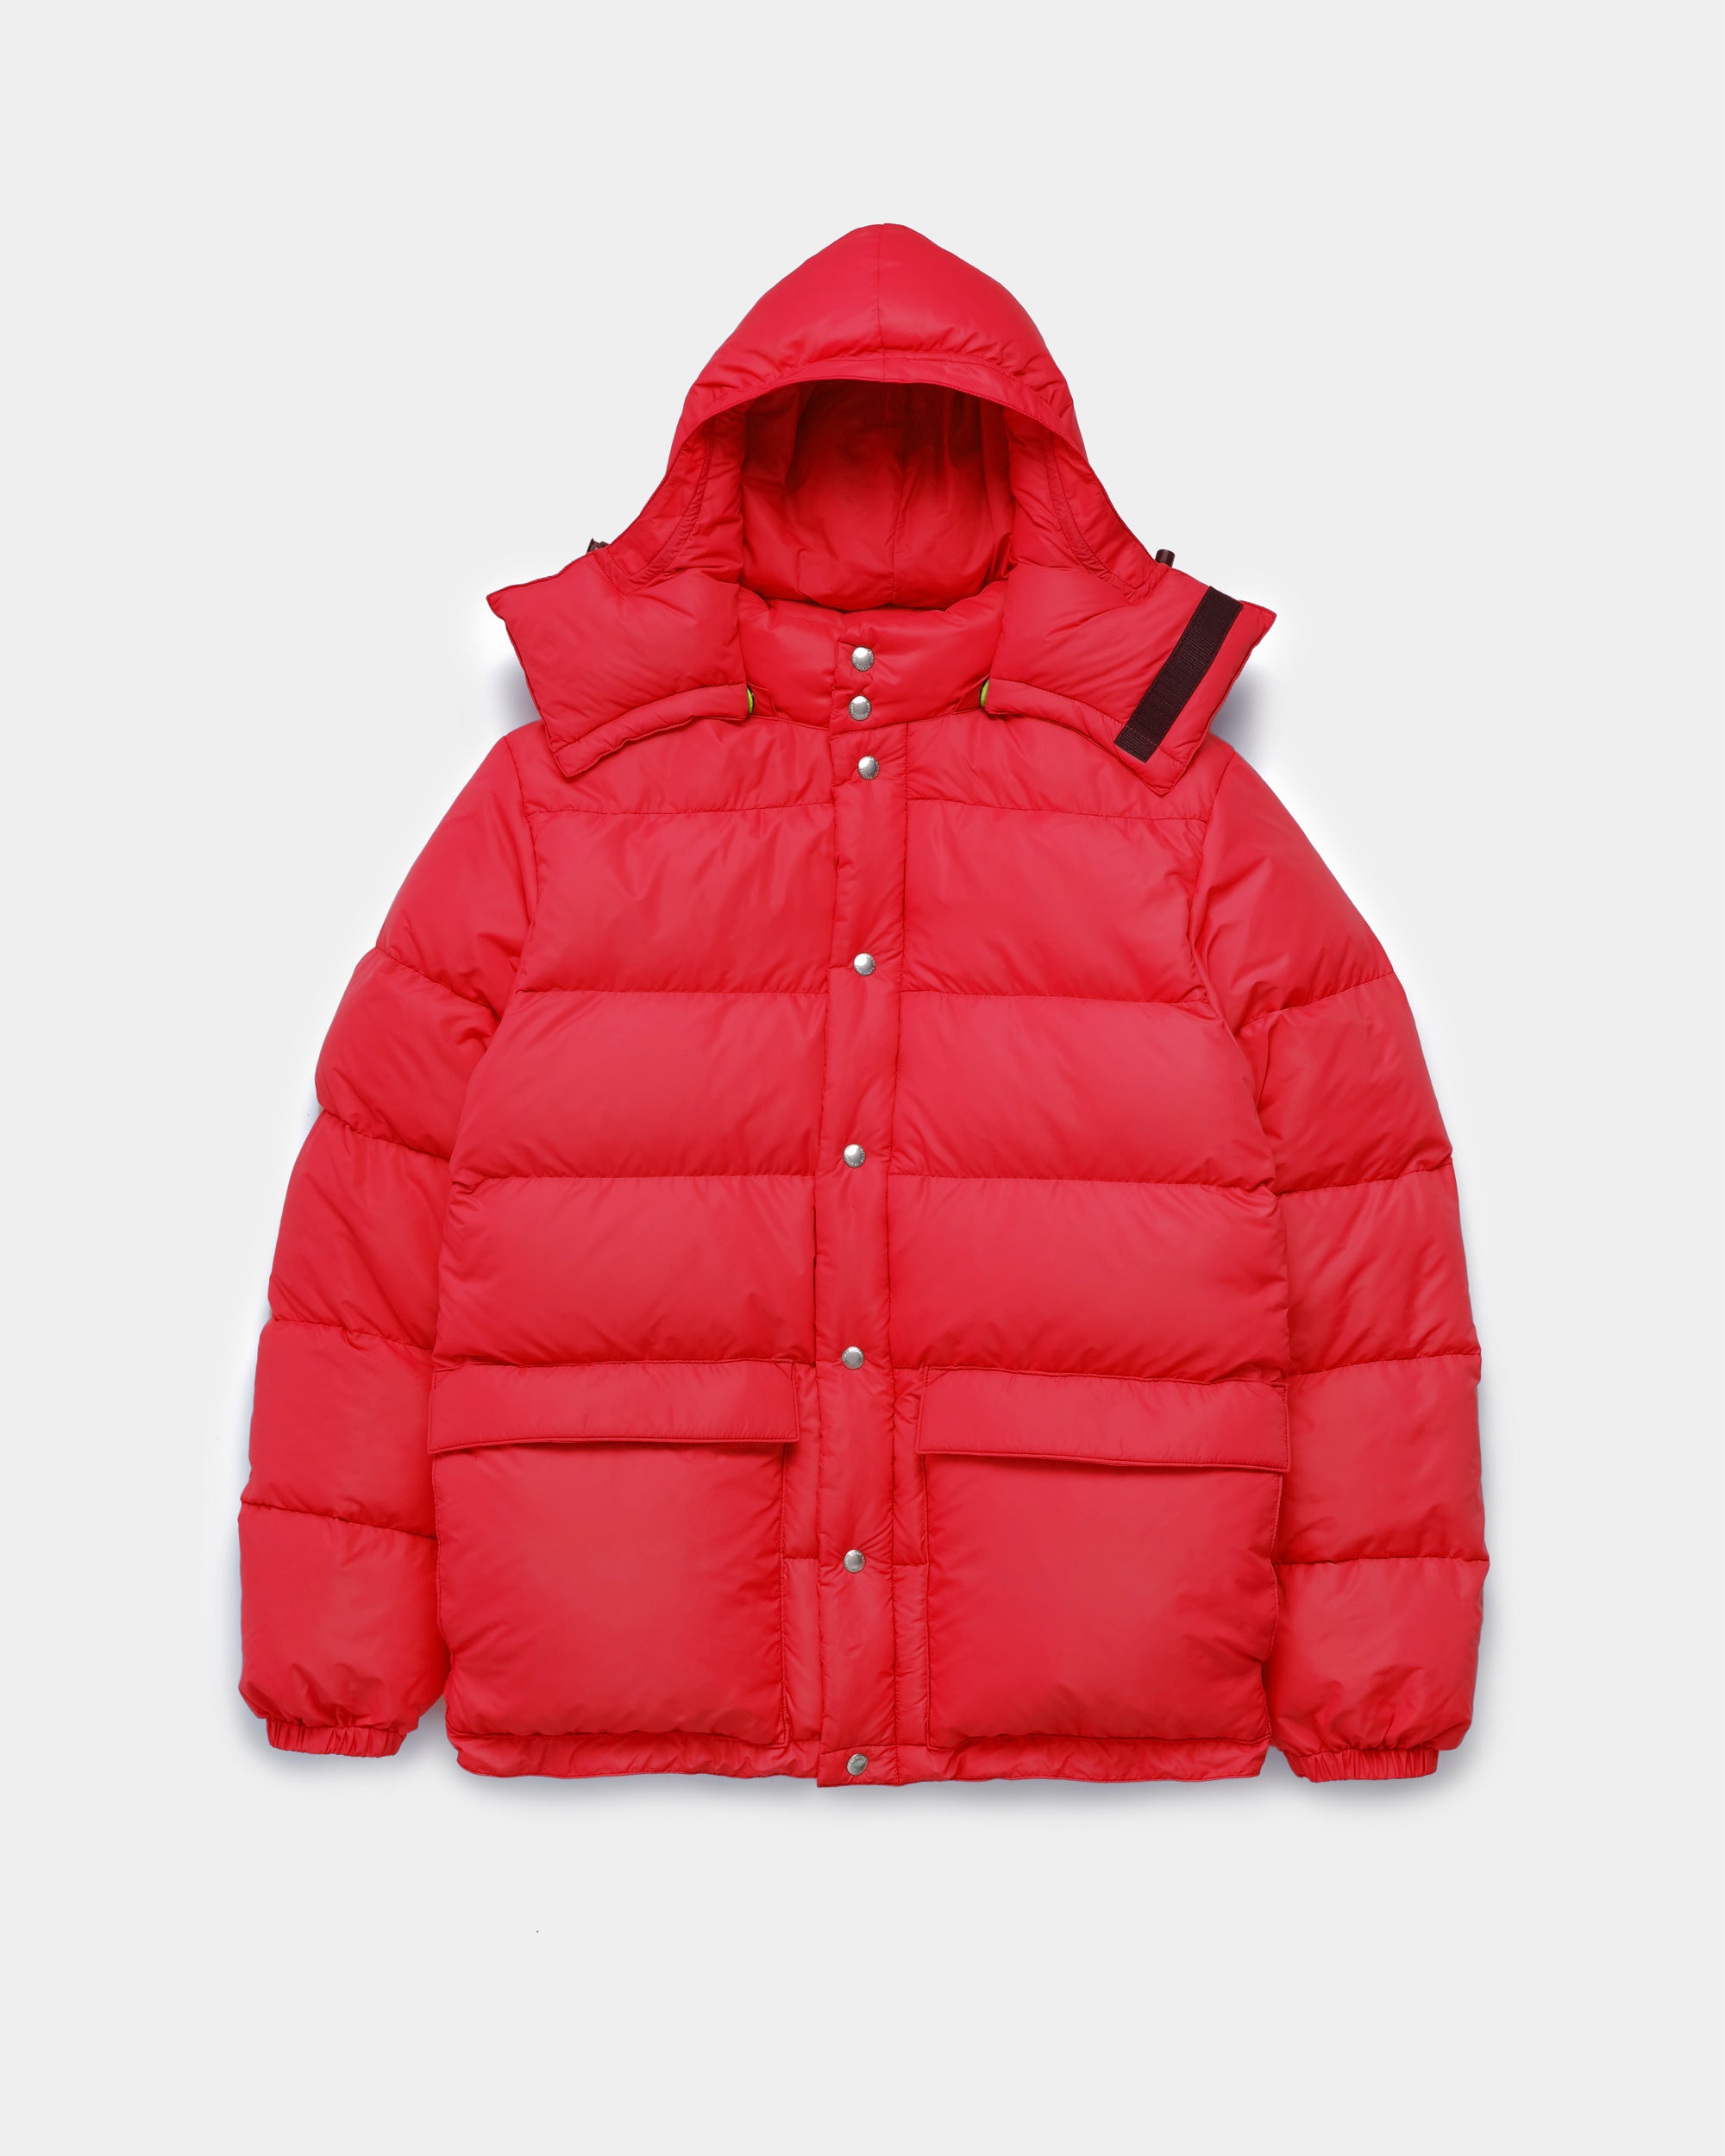 Front view of the Classico Parka in red nylon on a white background.